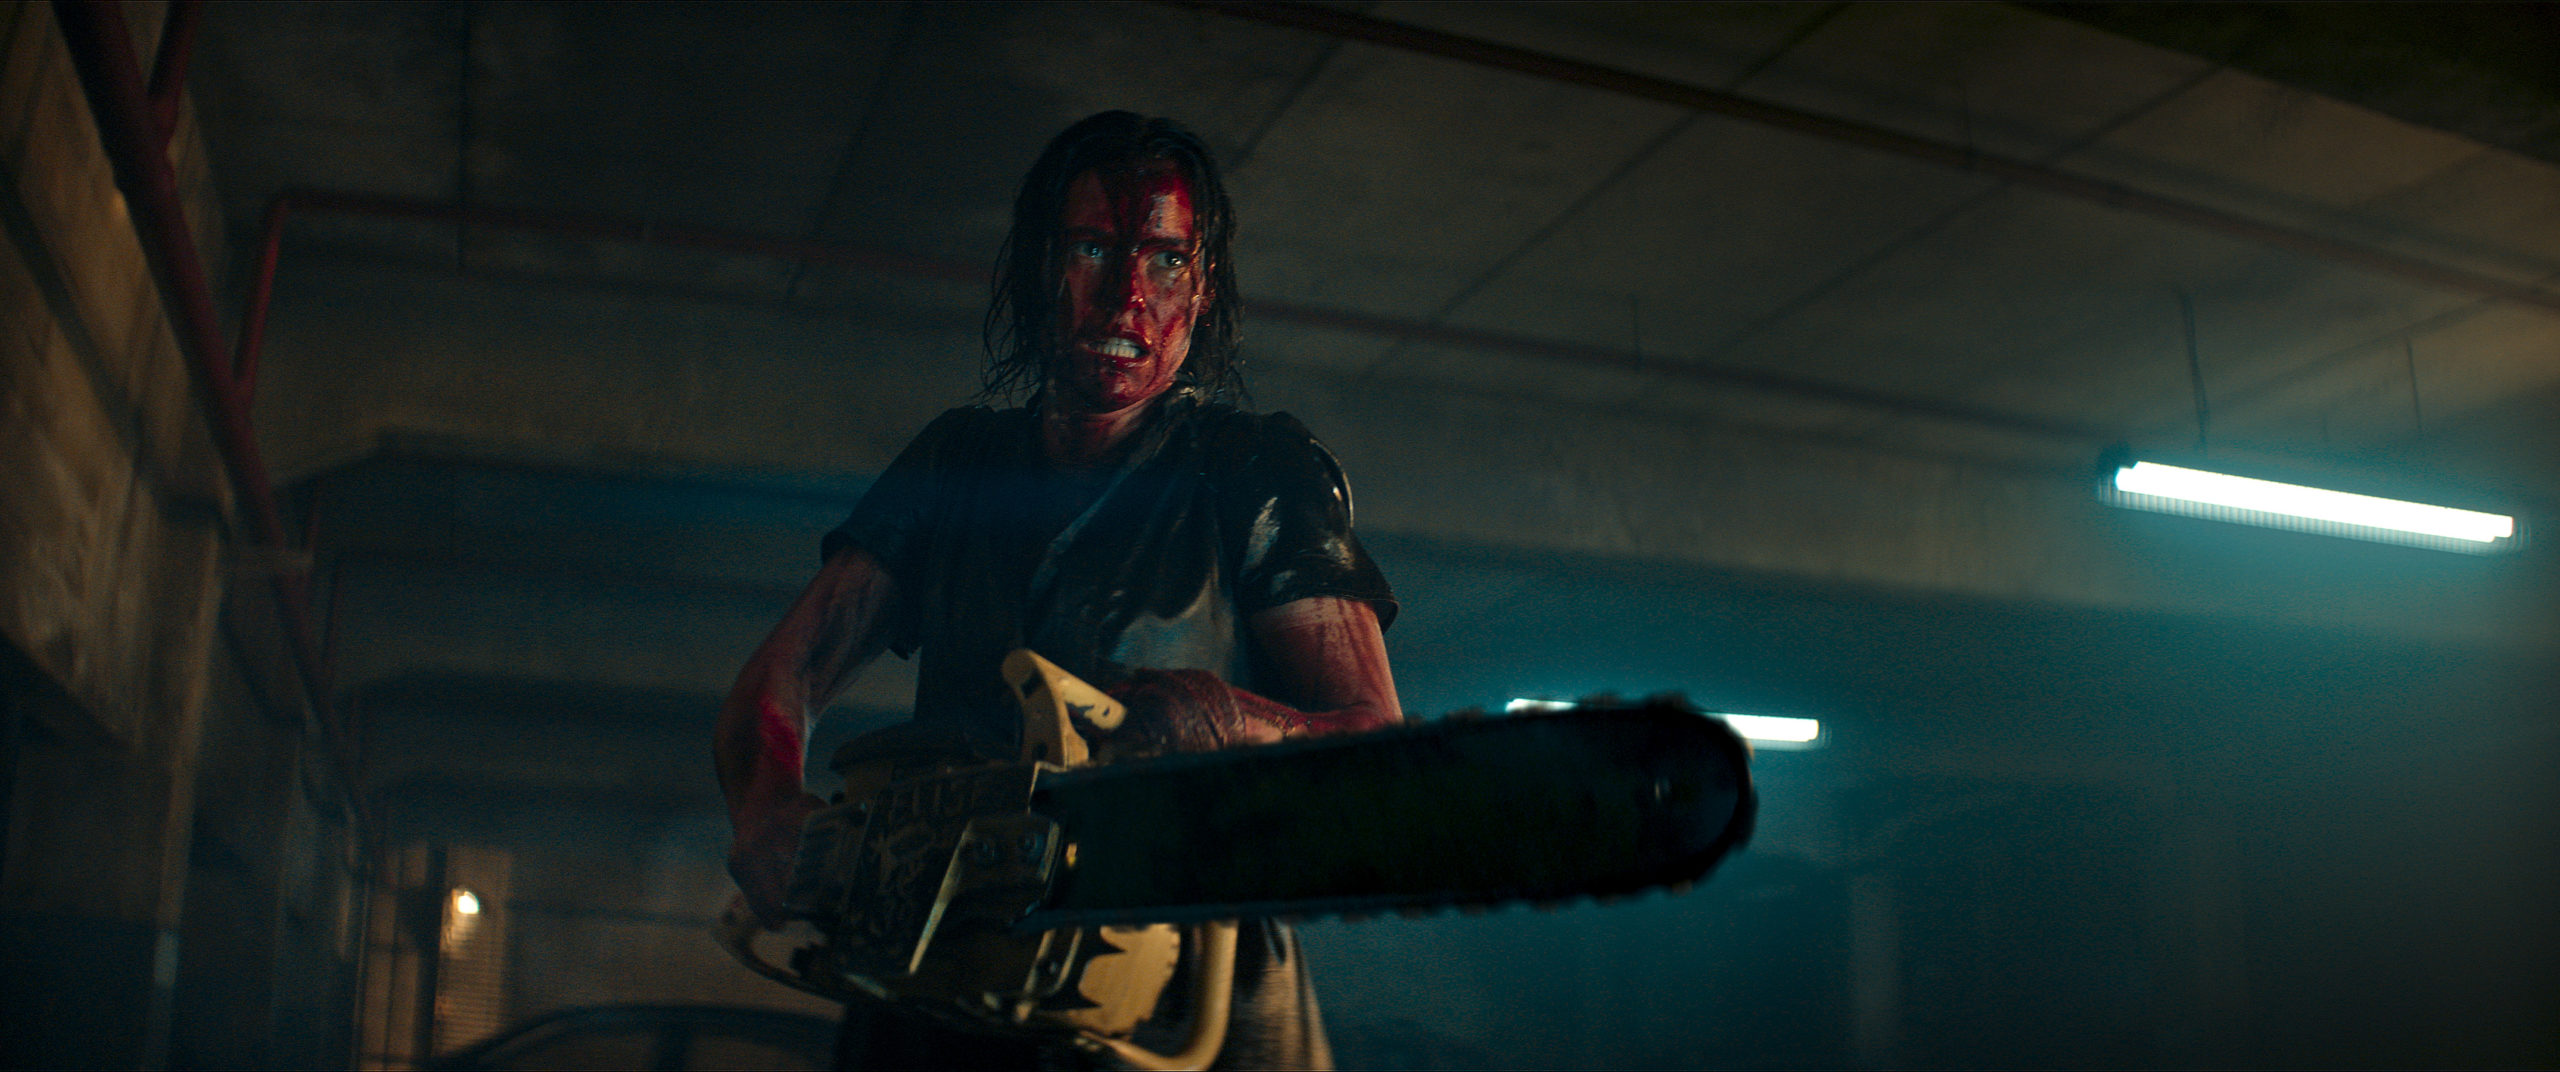 Evil Dead Rise Red Band Trailer Brings Back The Blood, Gore, and Scares